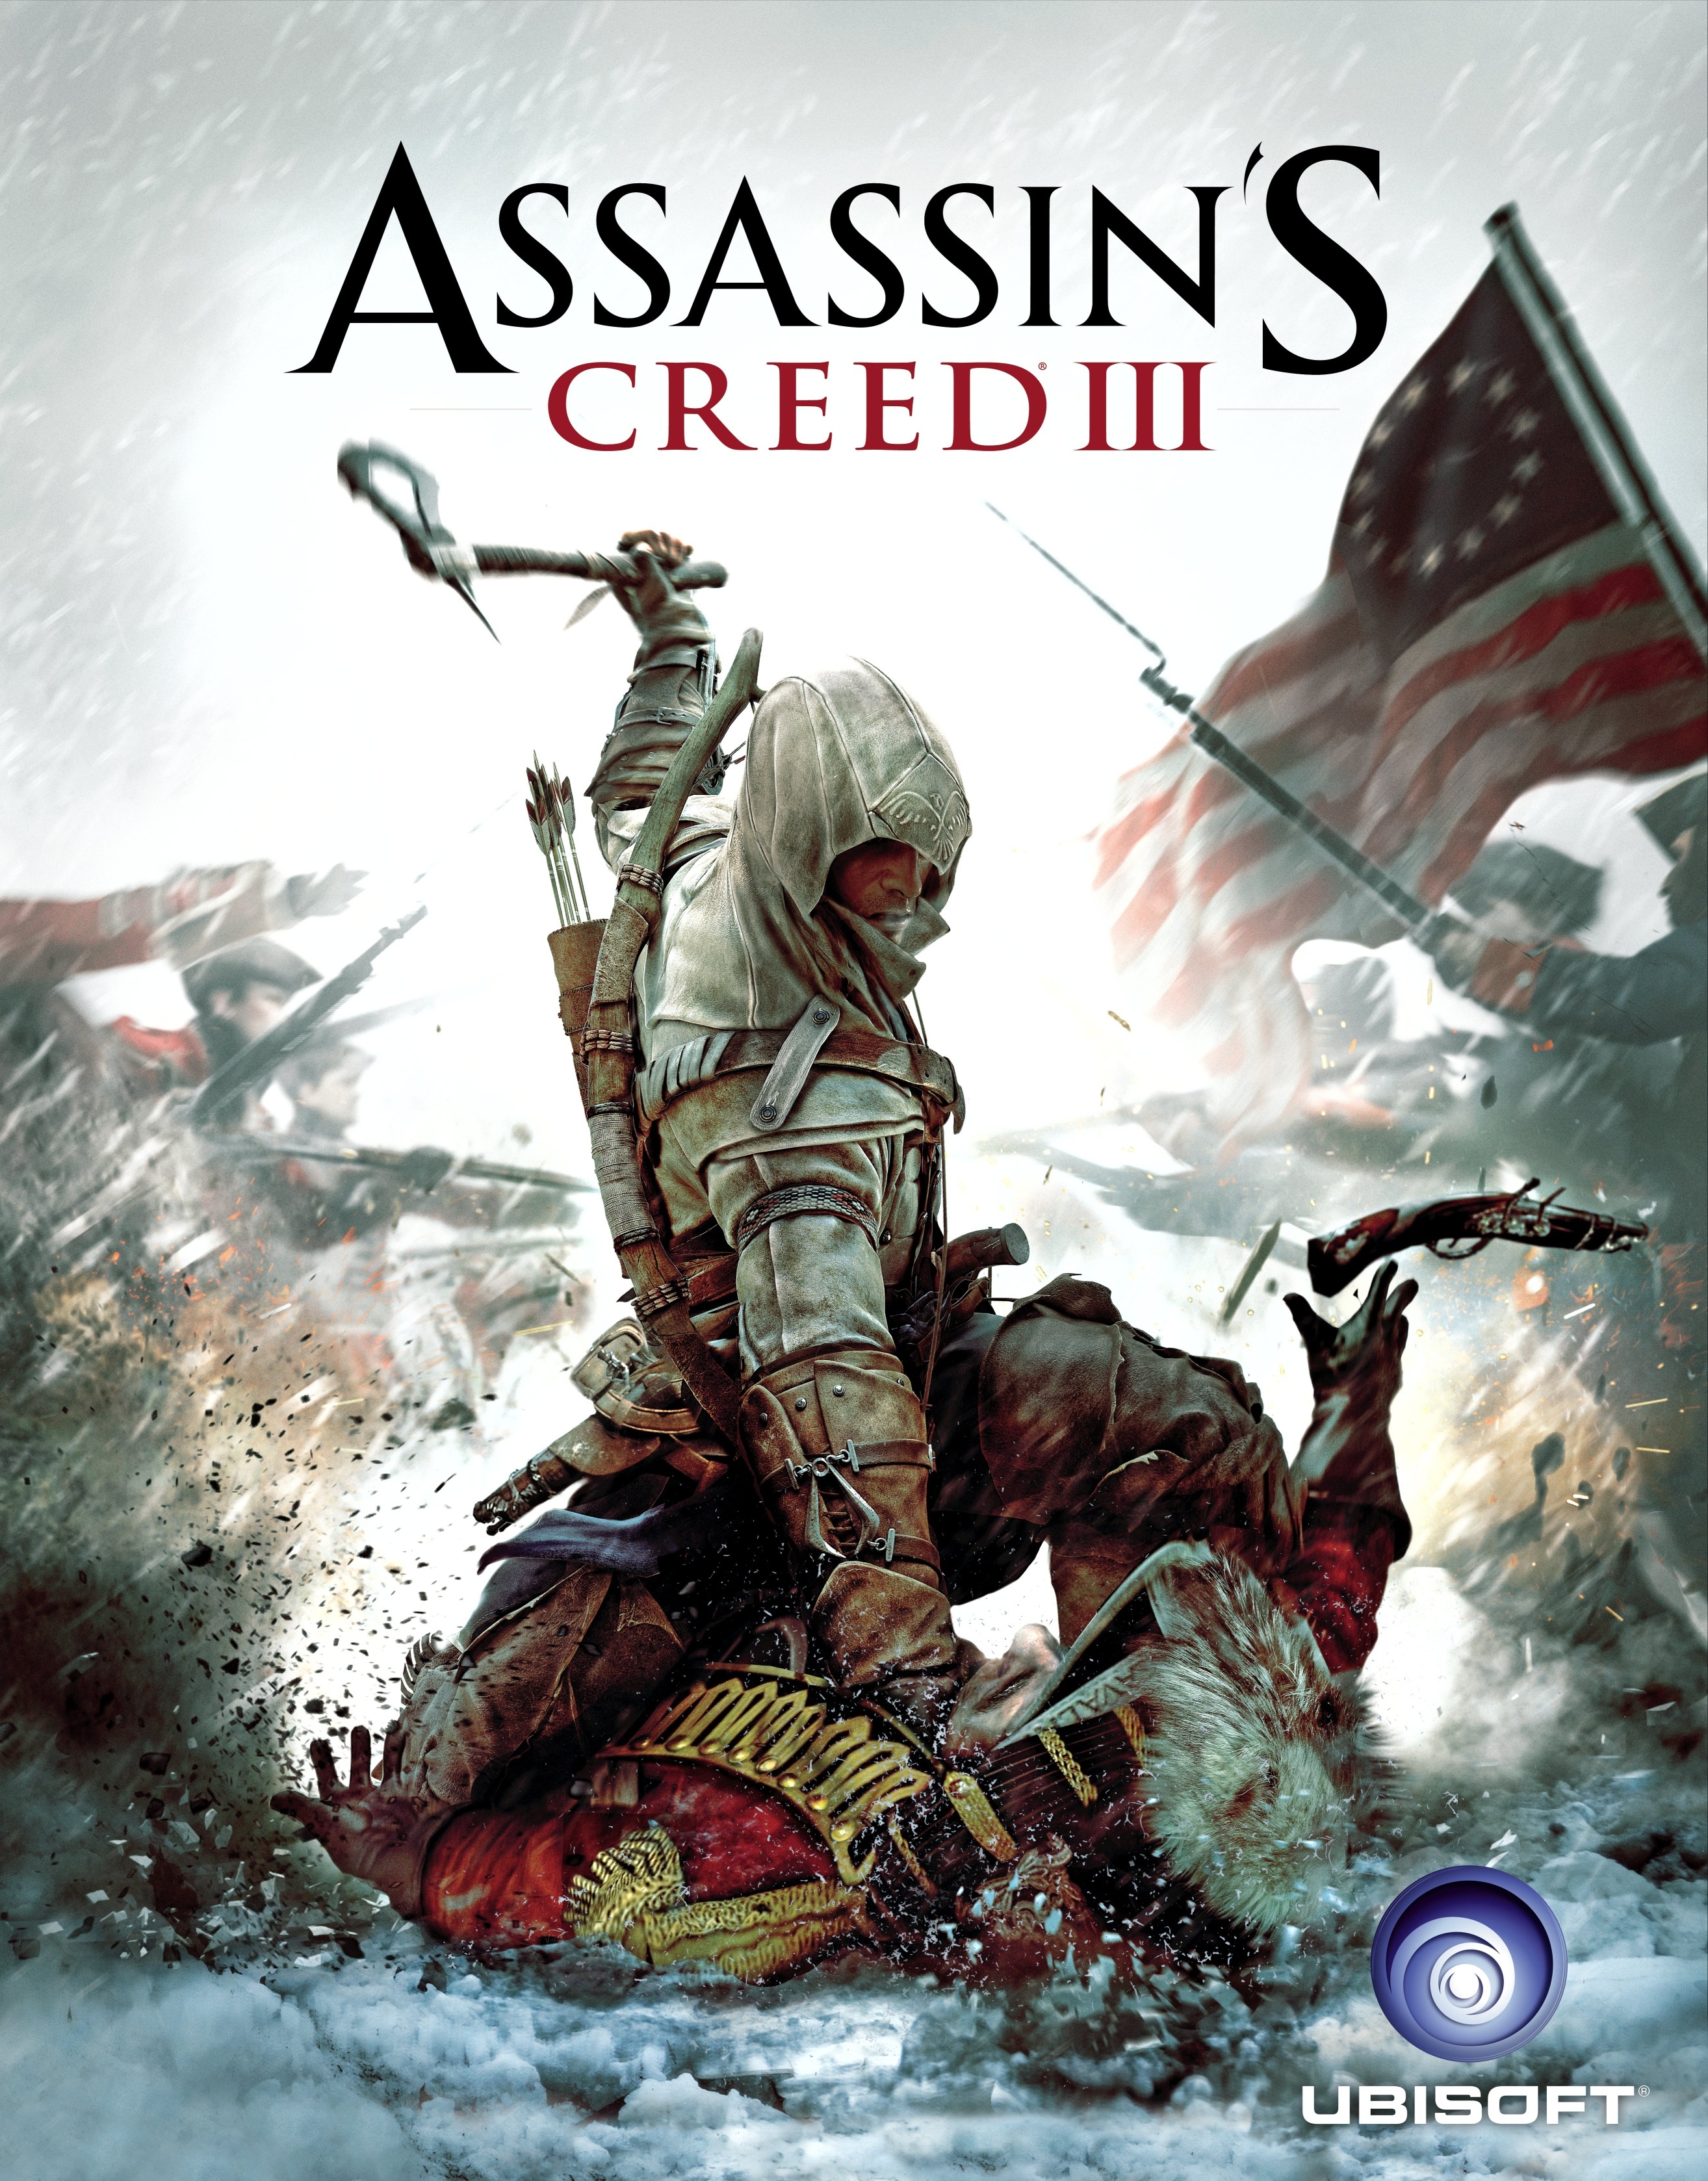 Assassins creed game download for mac